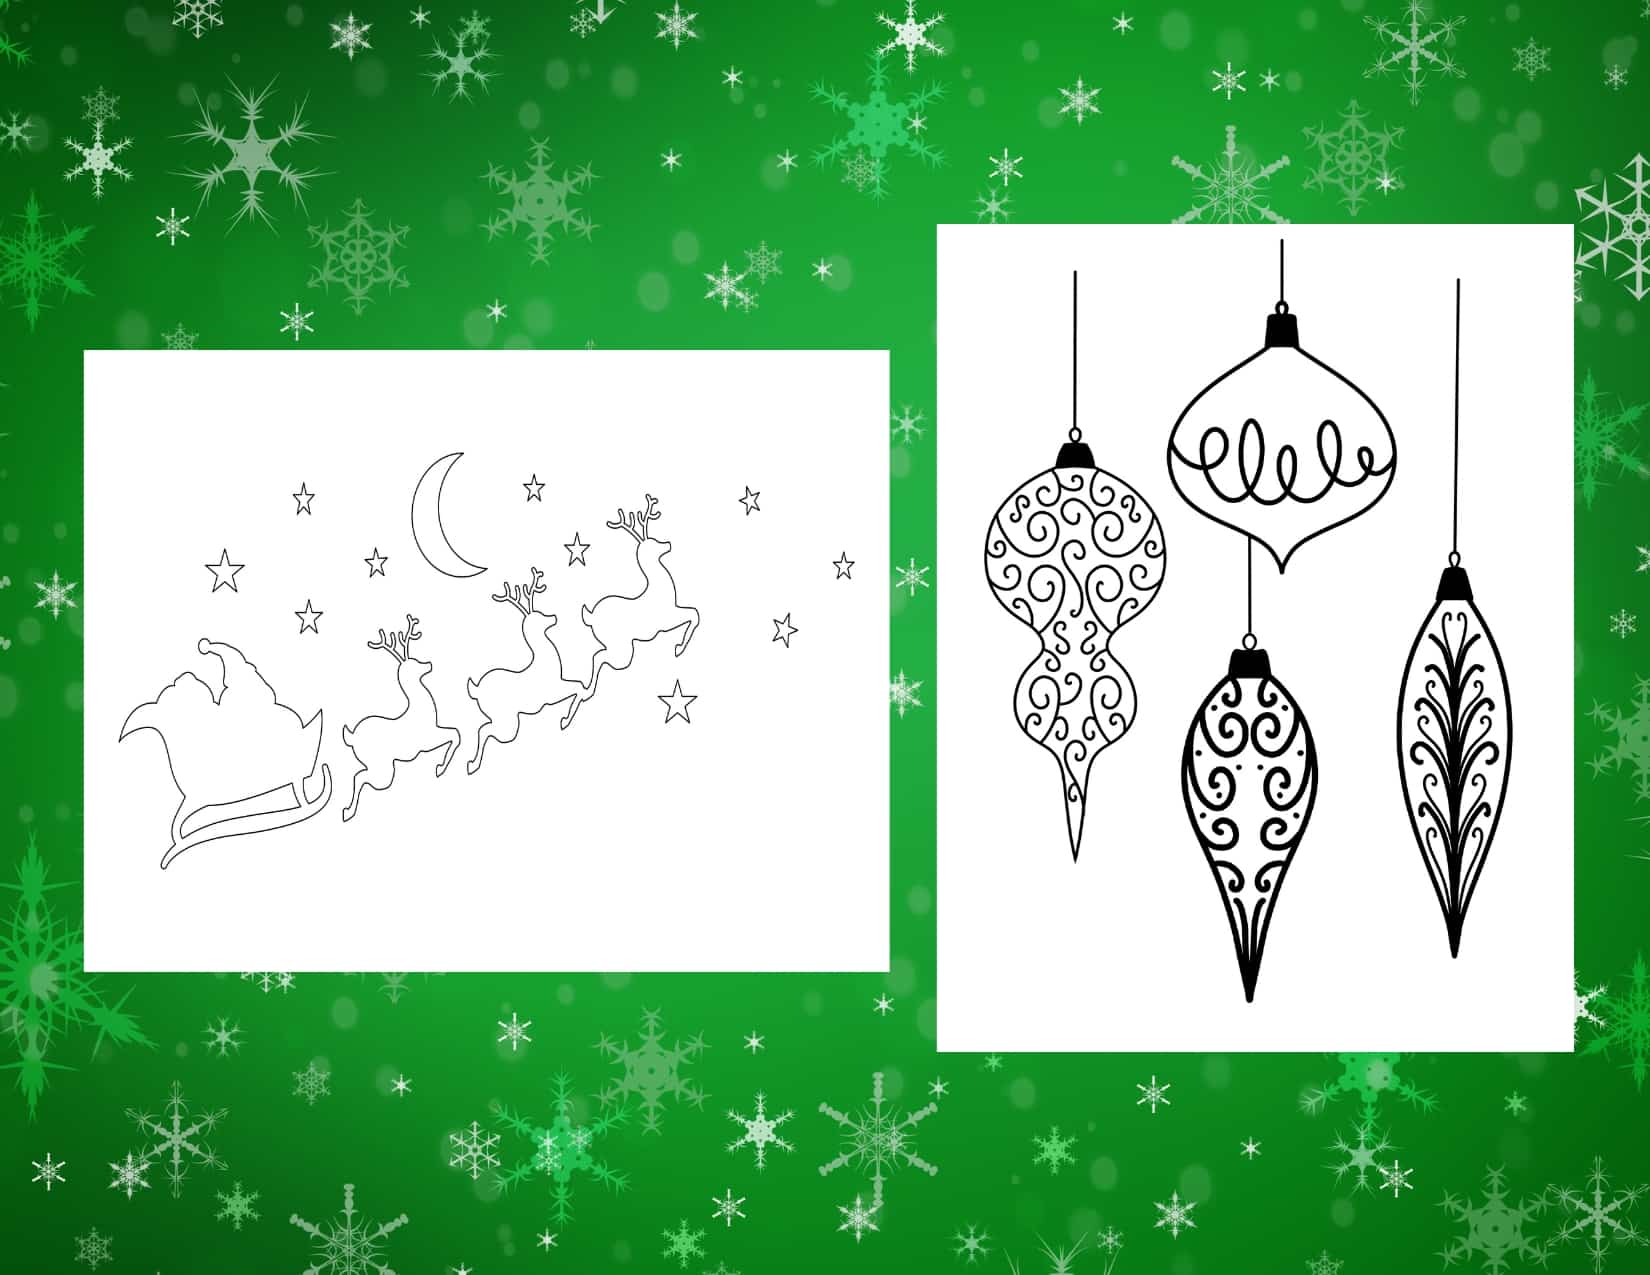 Two coloring pages, one of Santa in his sleigh with reindeer and one of various Christmas ornaments